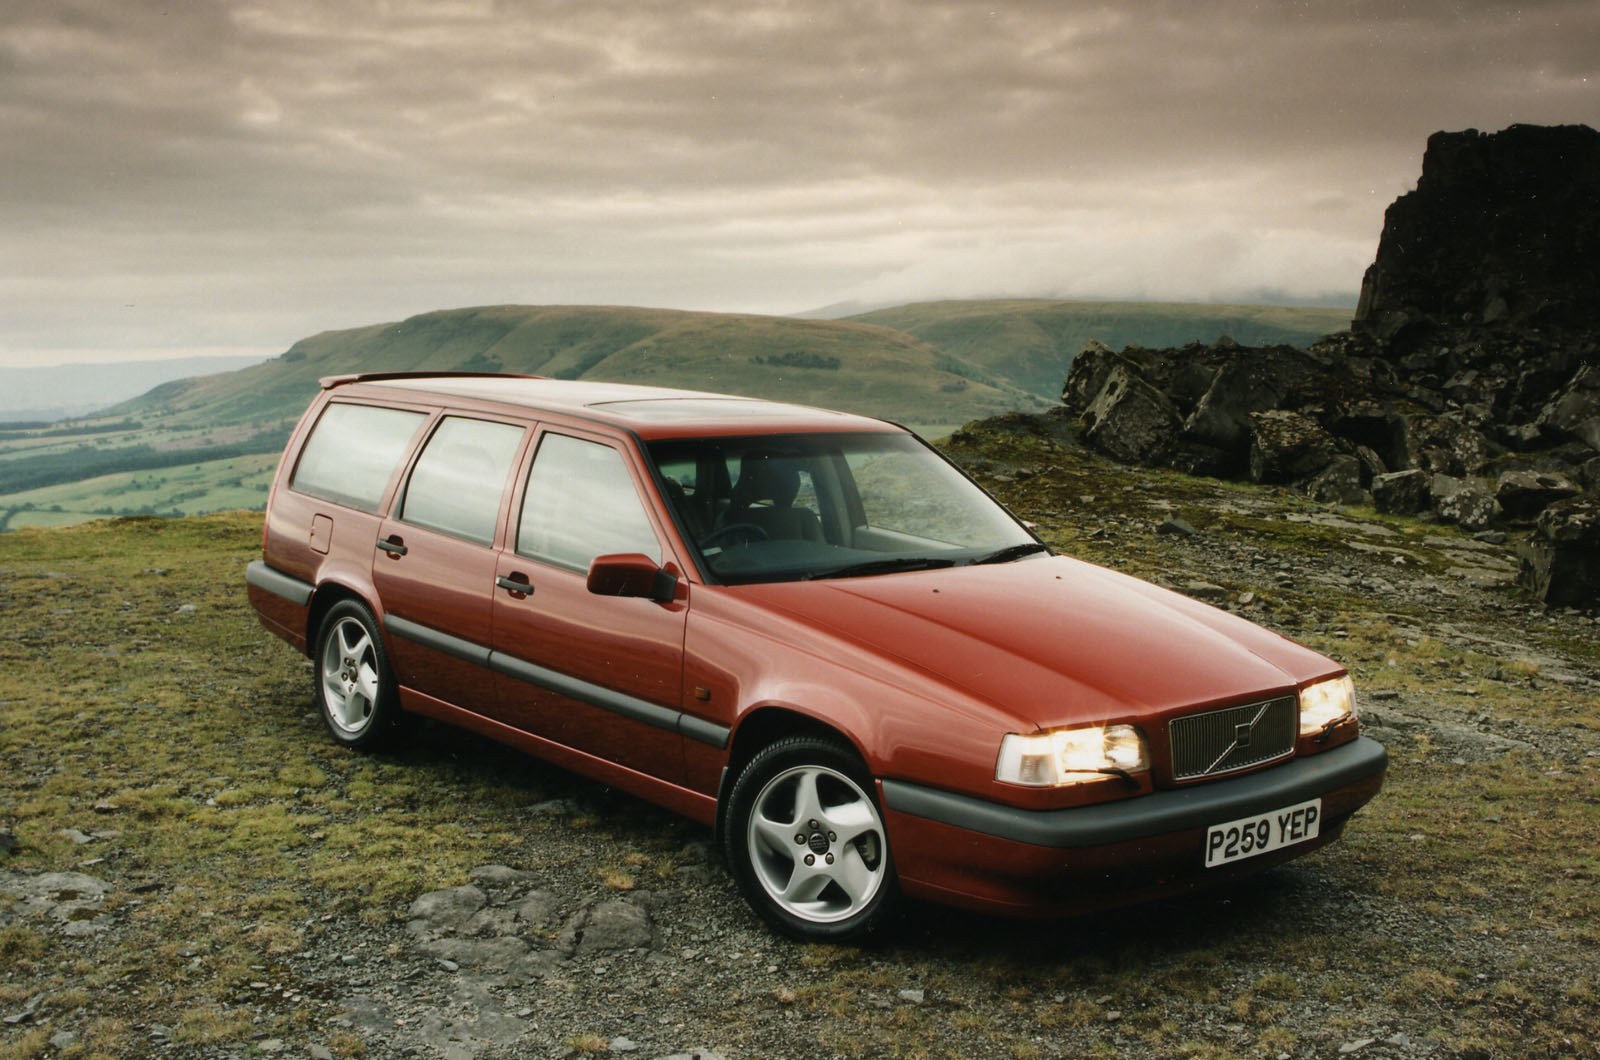 Used car buying guide: Volvo 850 | Autocar